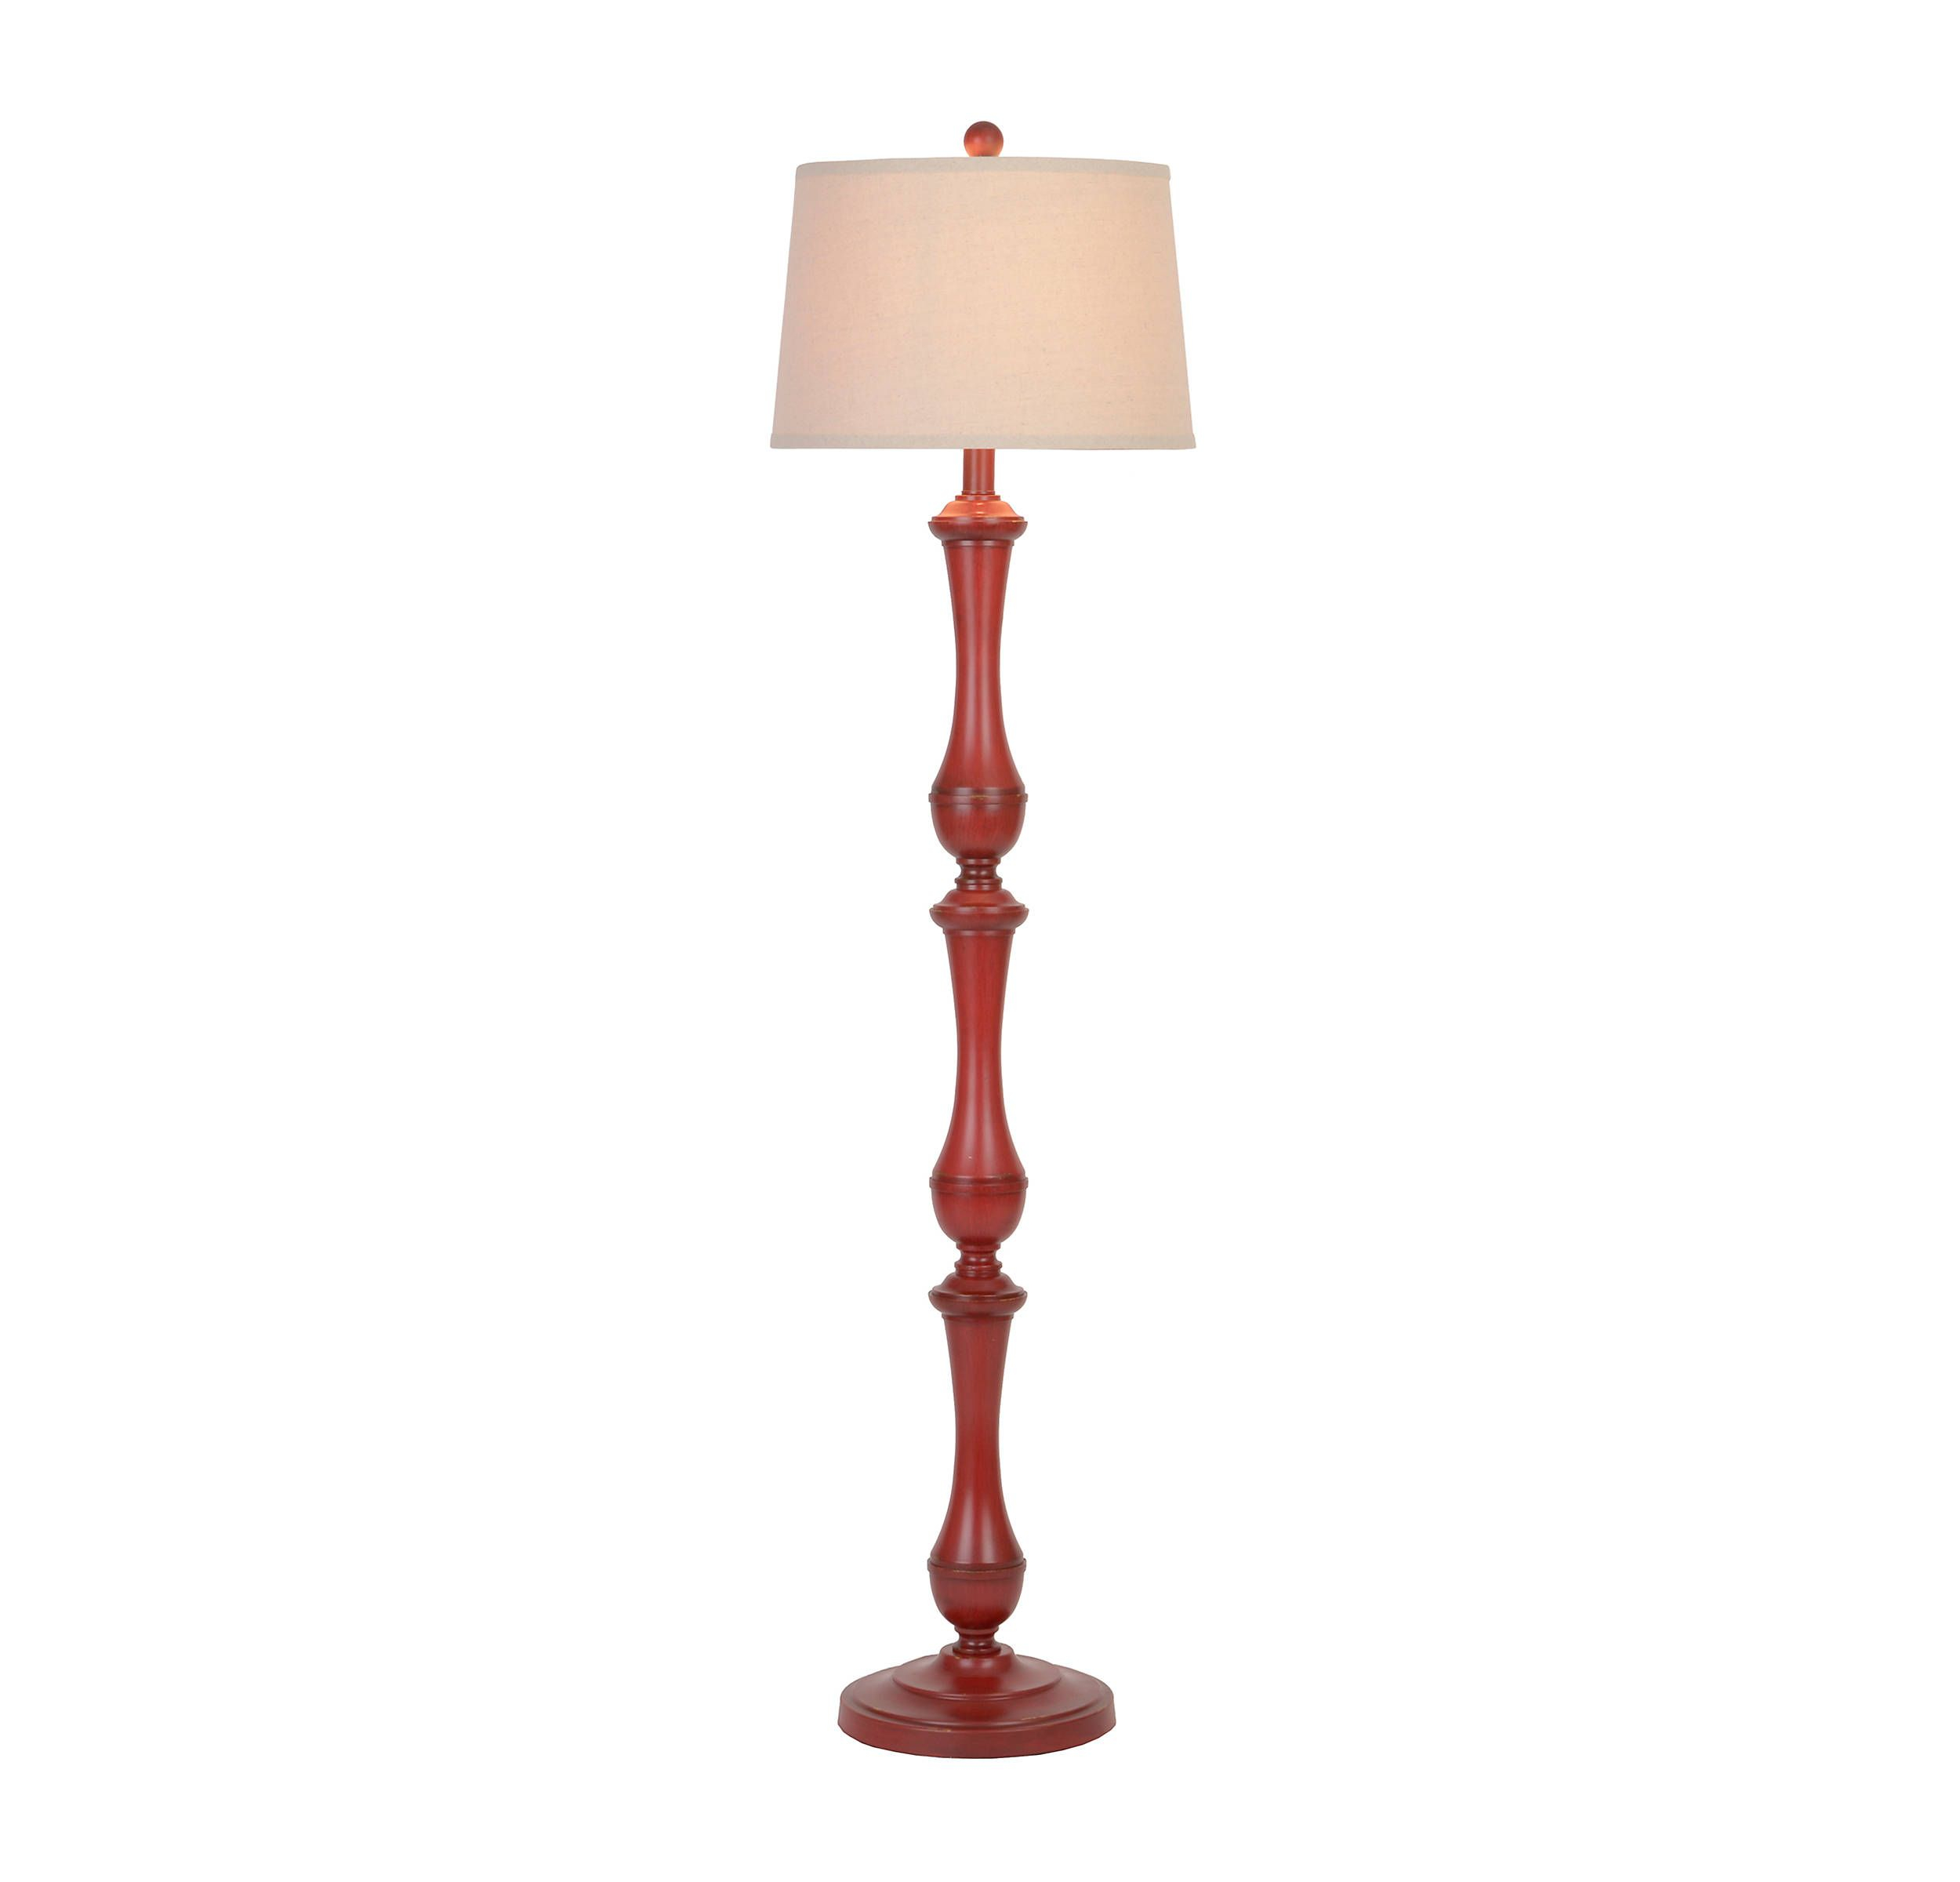 Product Details Hadley Red Spindle Floor Lamp In 2019 Red regarding proportions 2500 X 2400